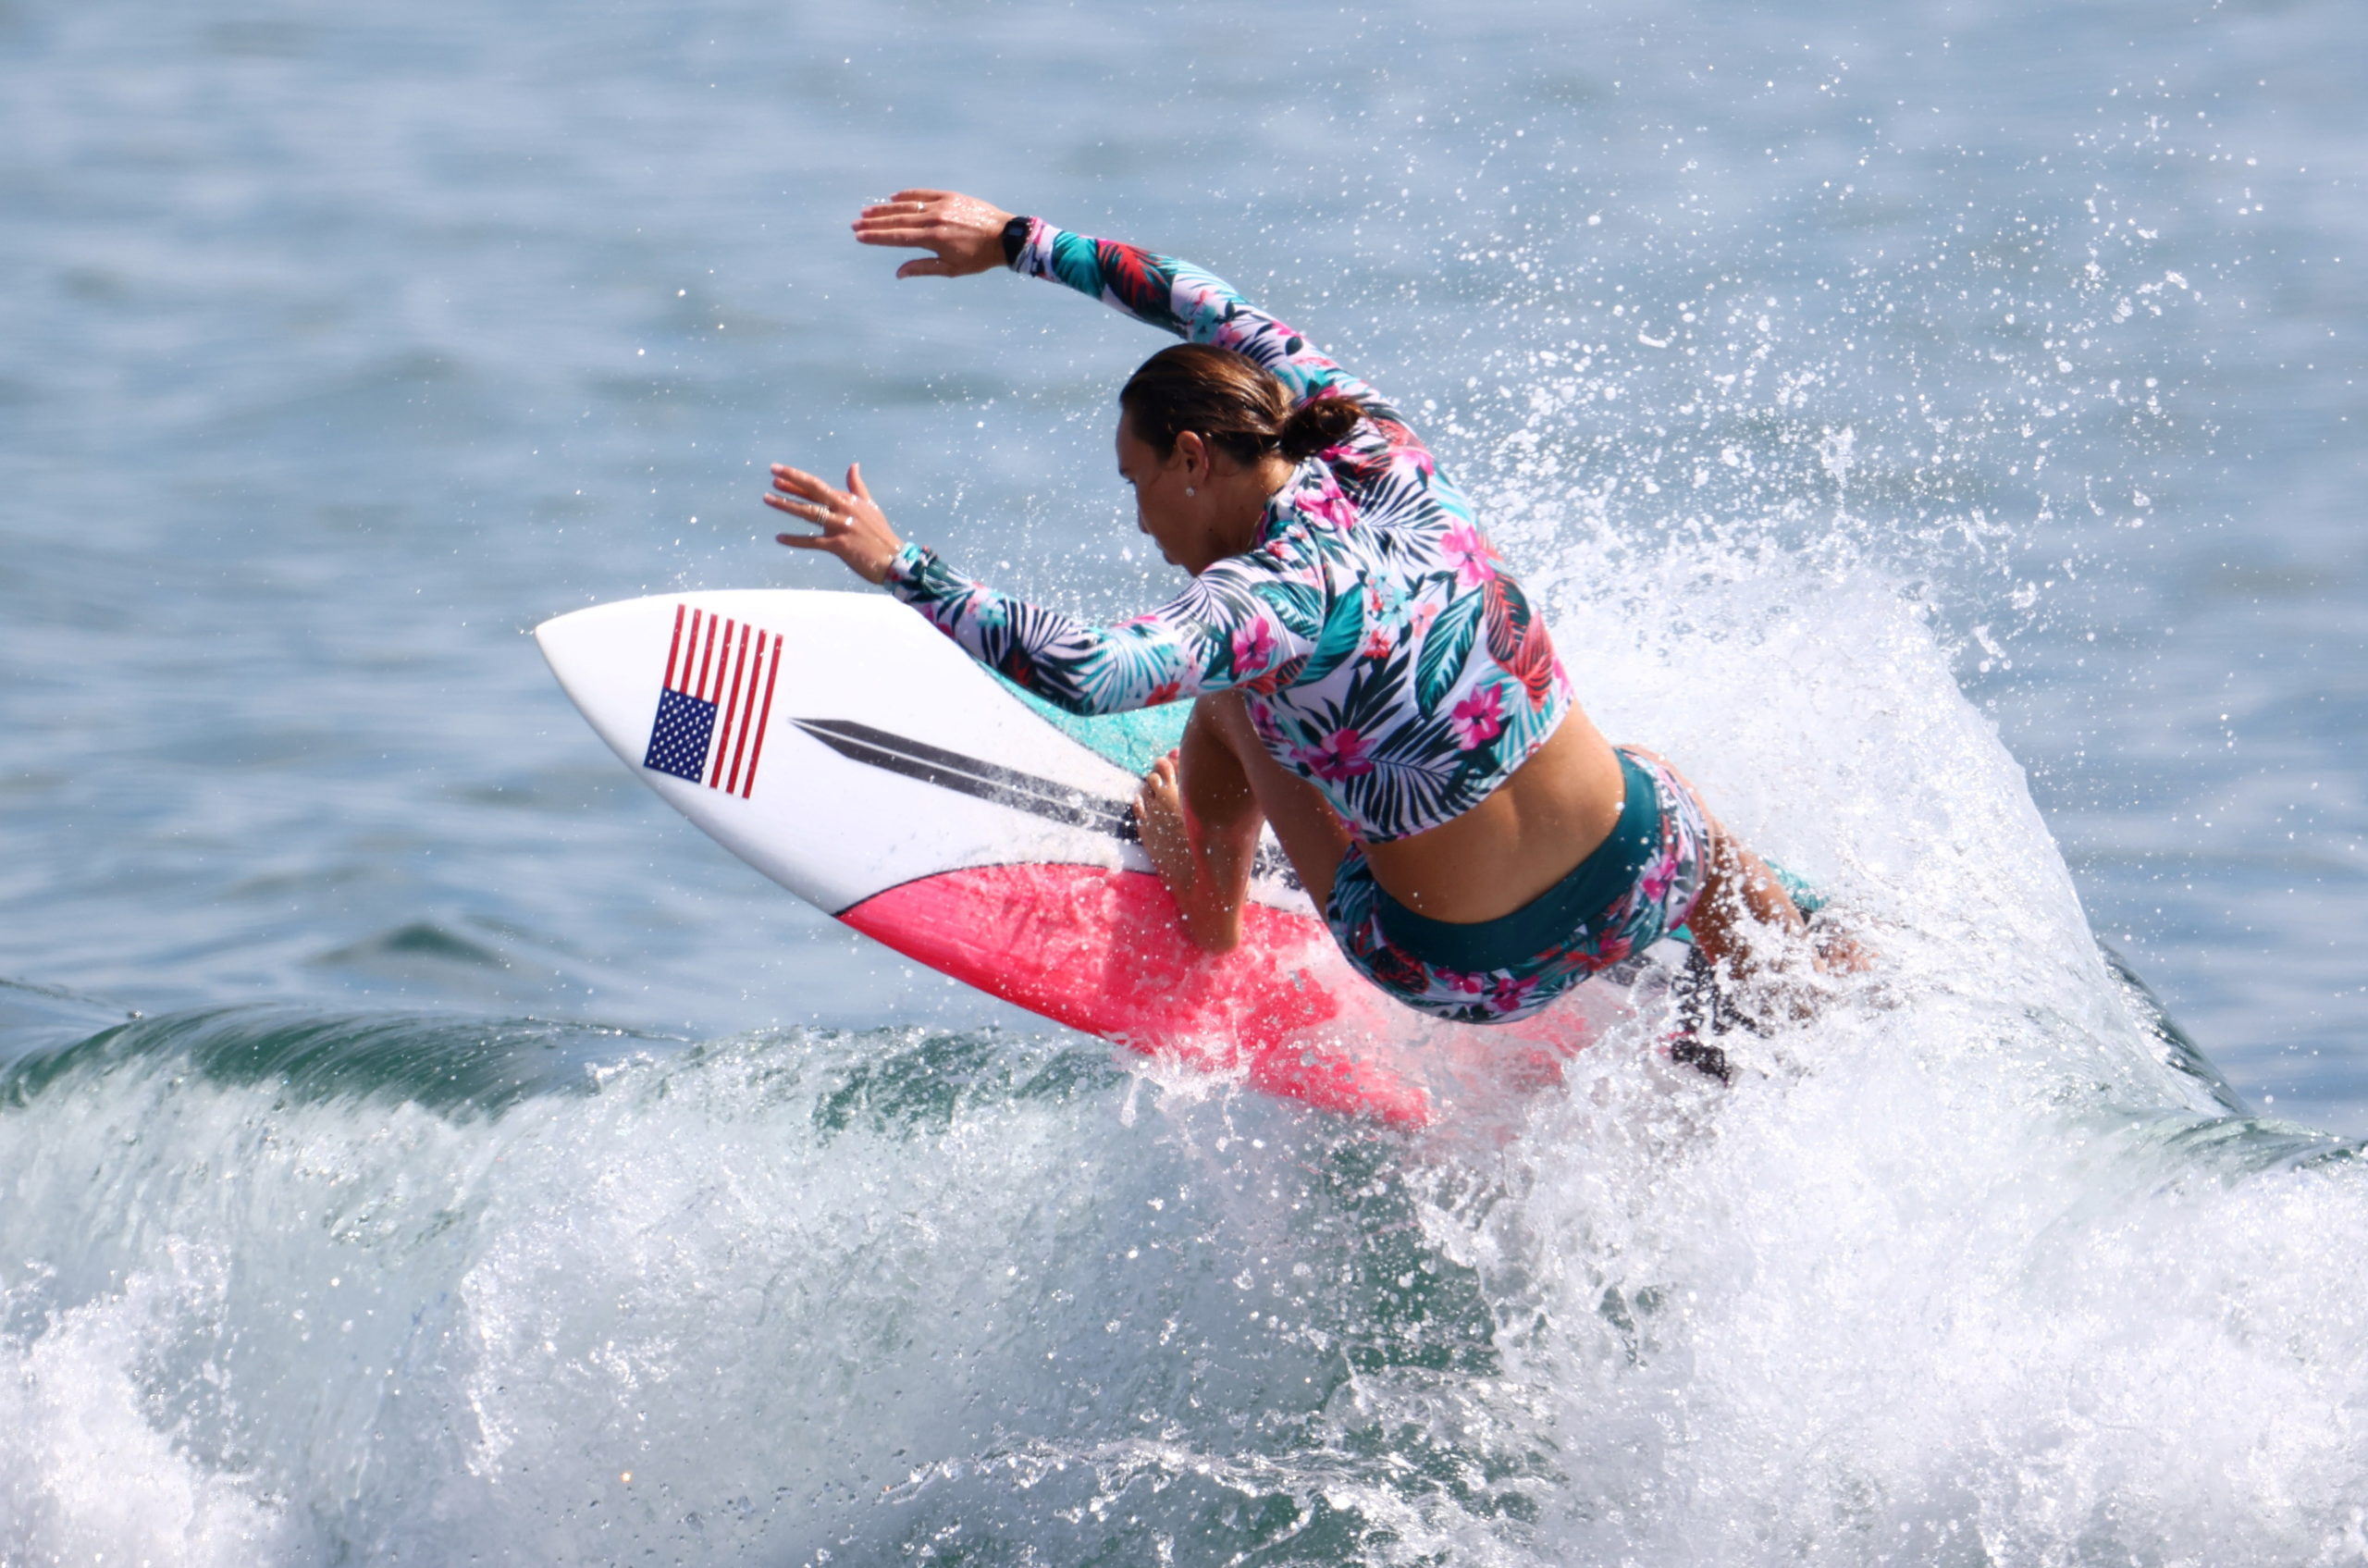 Carissa Moore of the United States during training